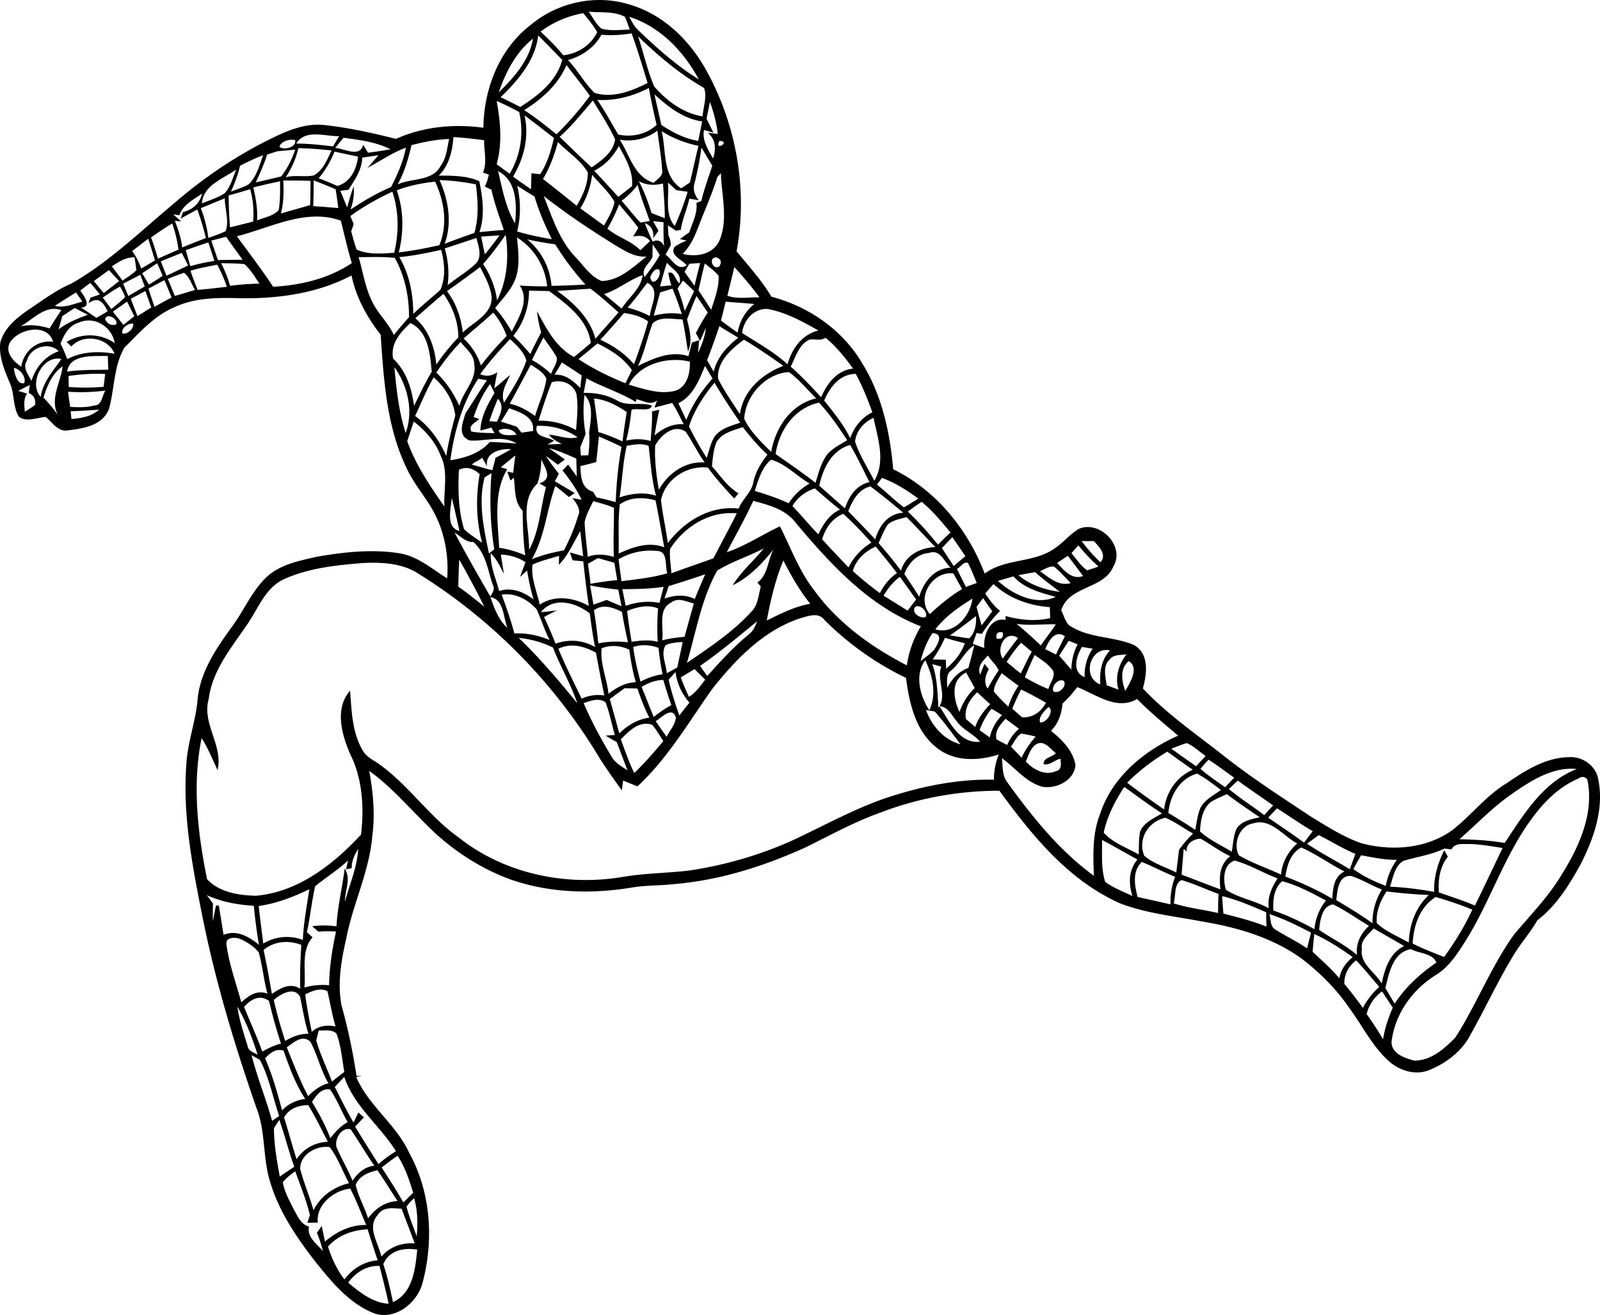 Printable Spiderman Coloring Pages
 Free Printable Spiderman Coloring Pages For Kids